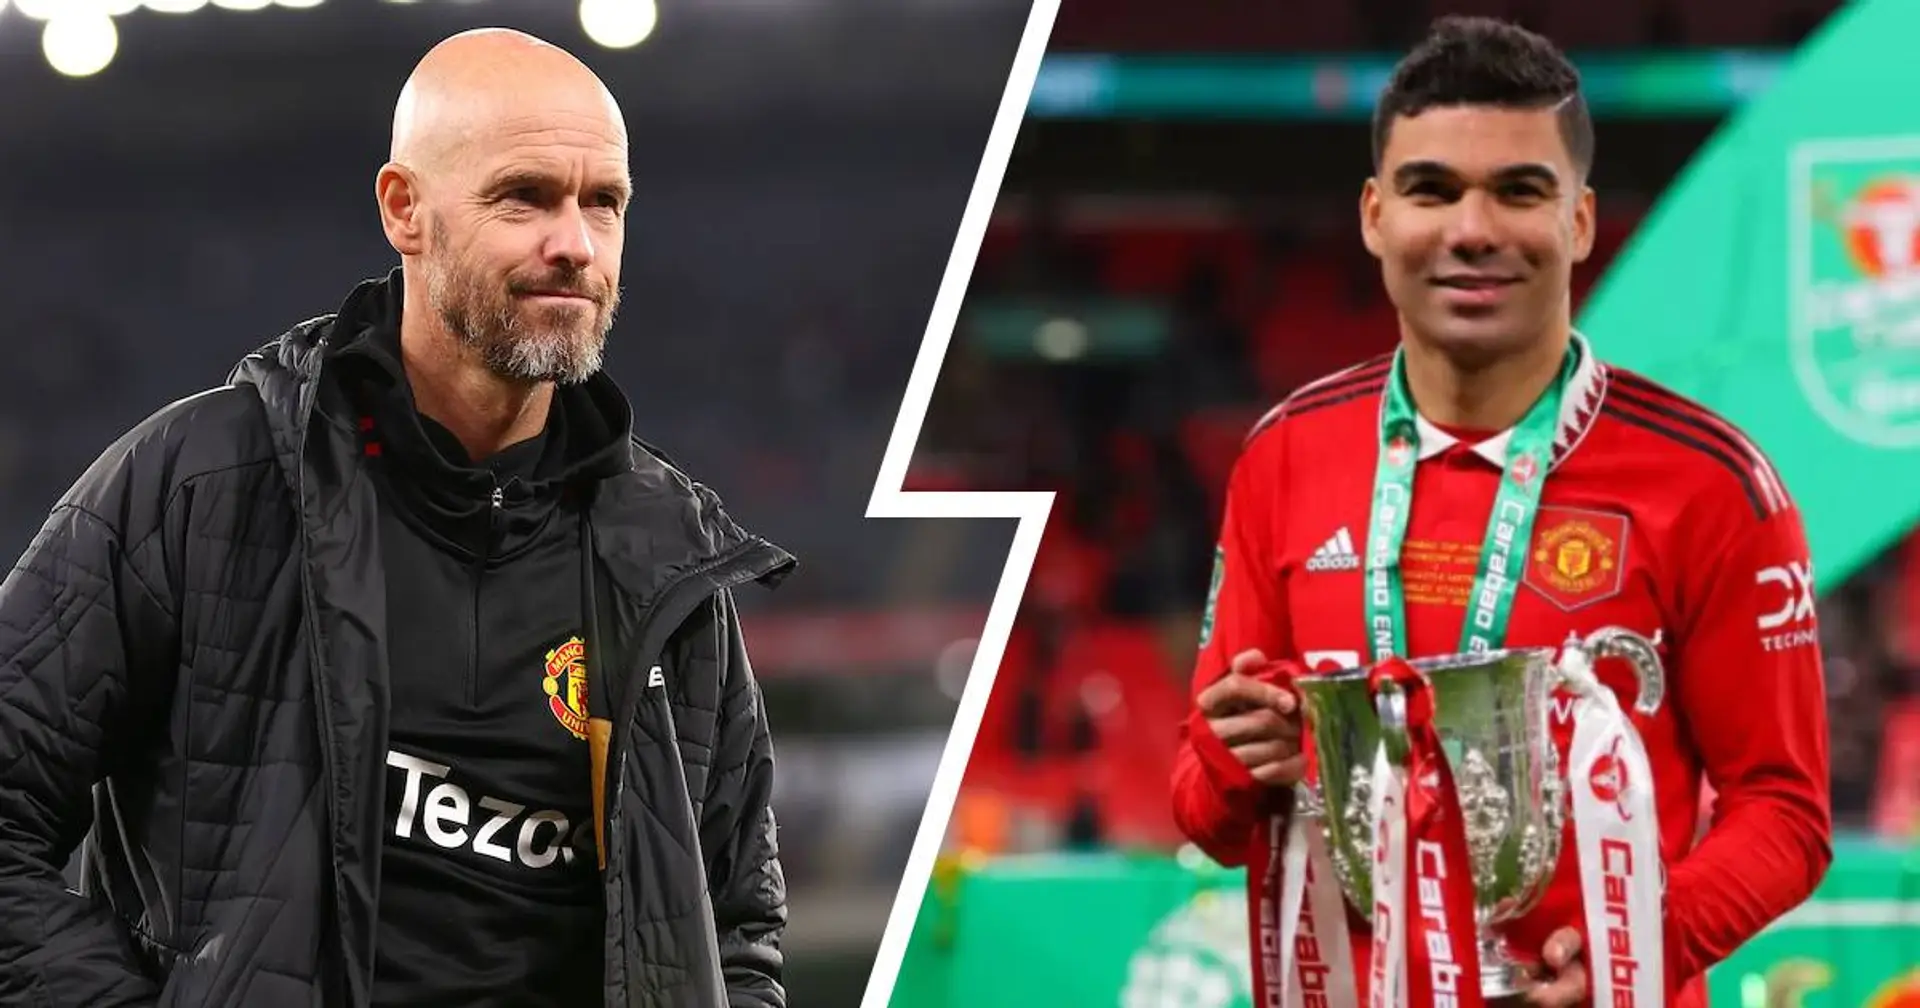 Revealed: Ten Hag's role in convincing Casemiro to join Man United